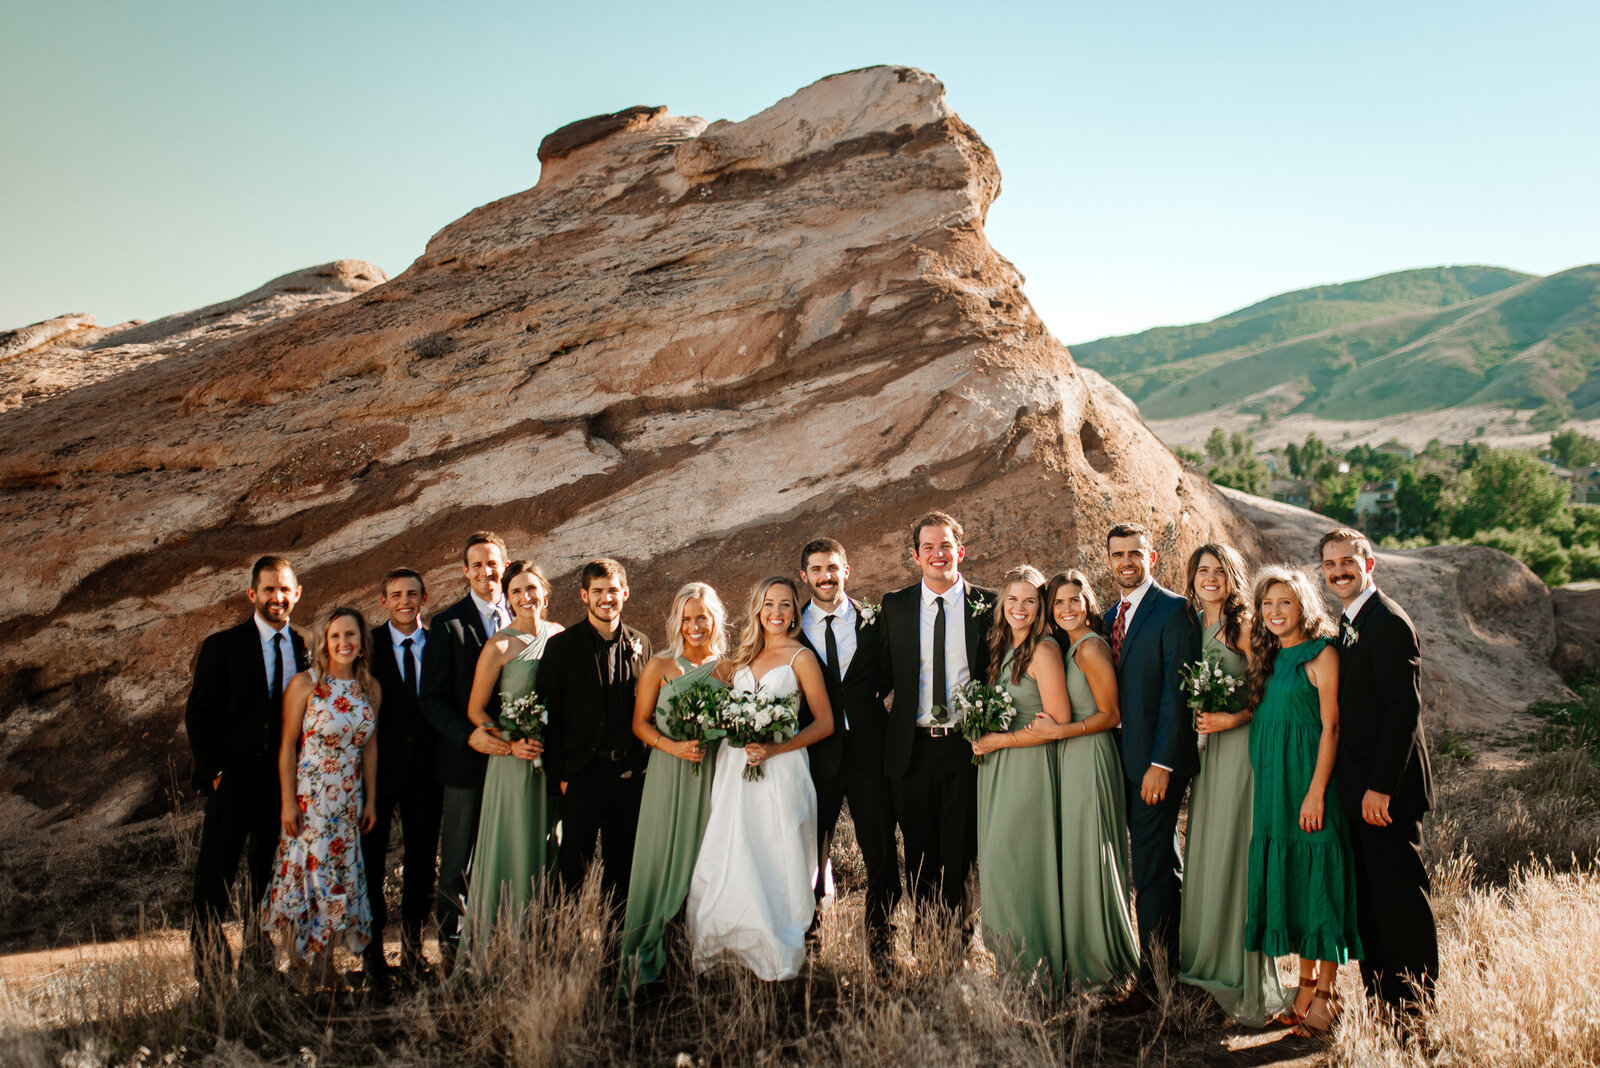 Gorgeous photo of the bridal party at red rocks